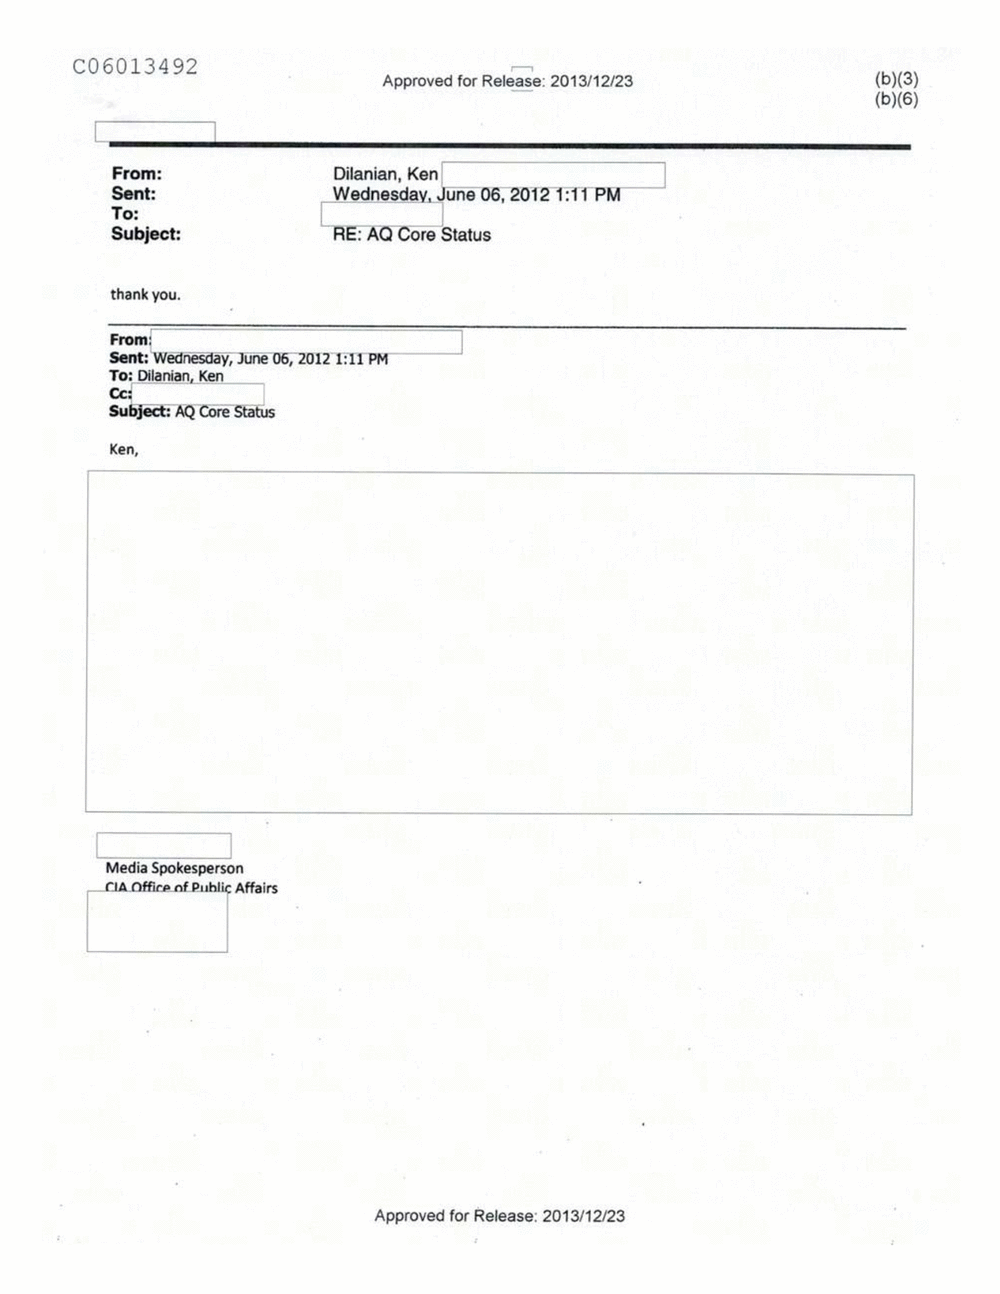 Page 342 from Email Correspondence Between Reporters and CIA Flacks